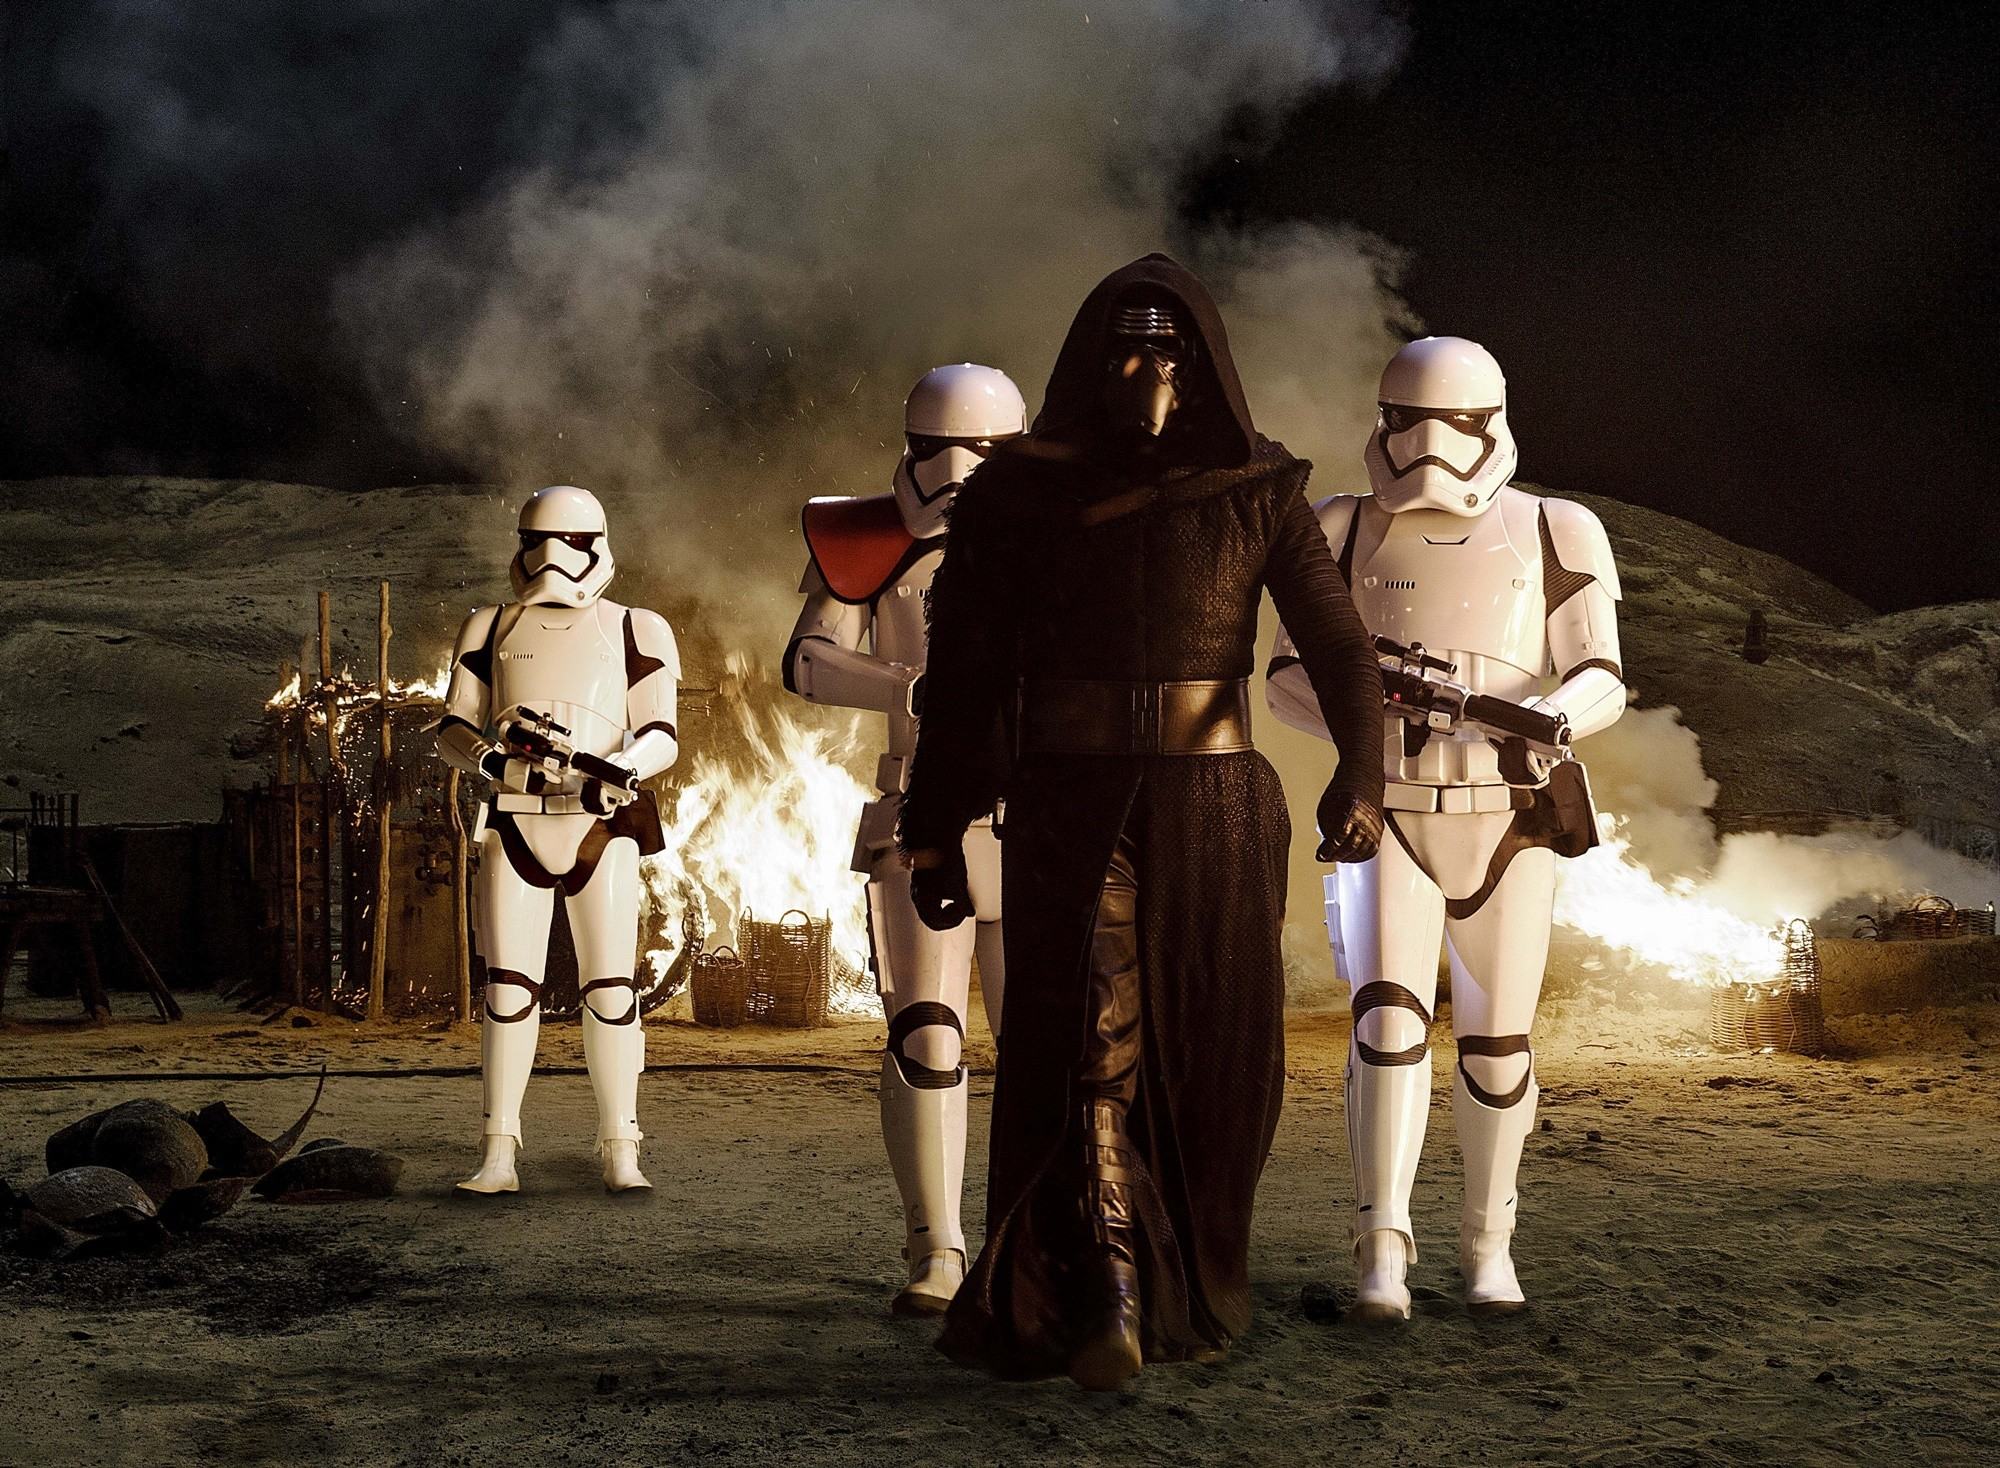 Kylo Ren and Stormtroopers from Walt Disney Pictures' Star Wars: The Force Awakens (2015)